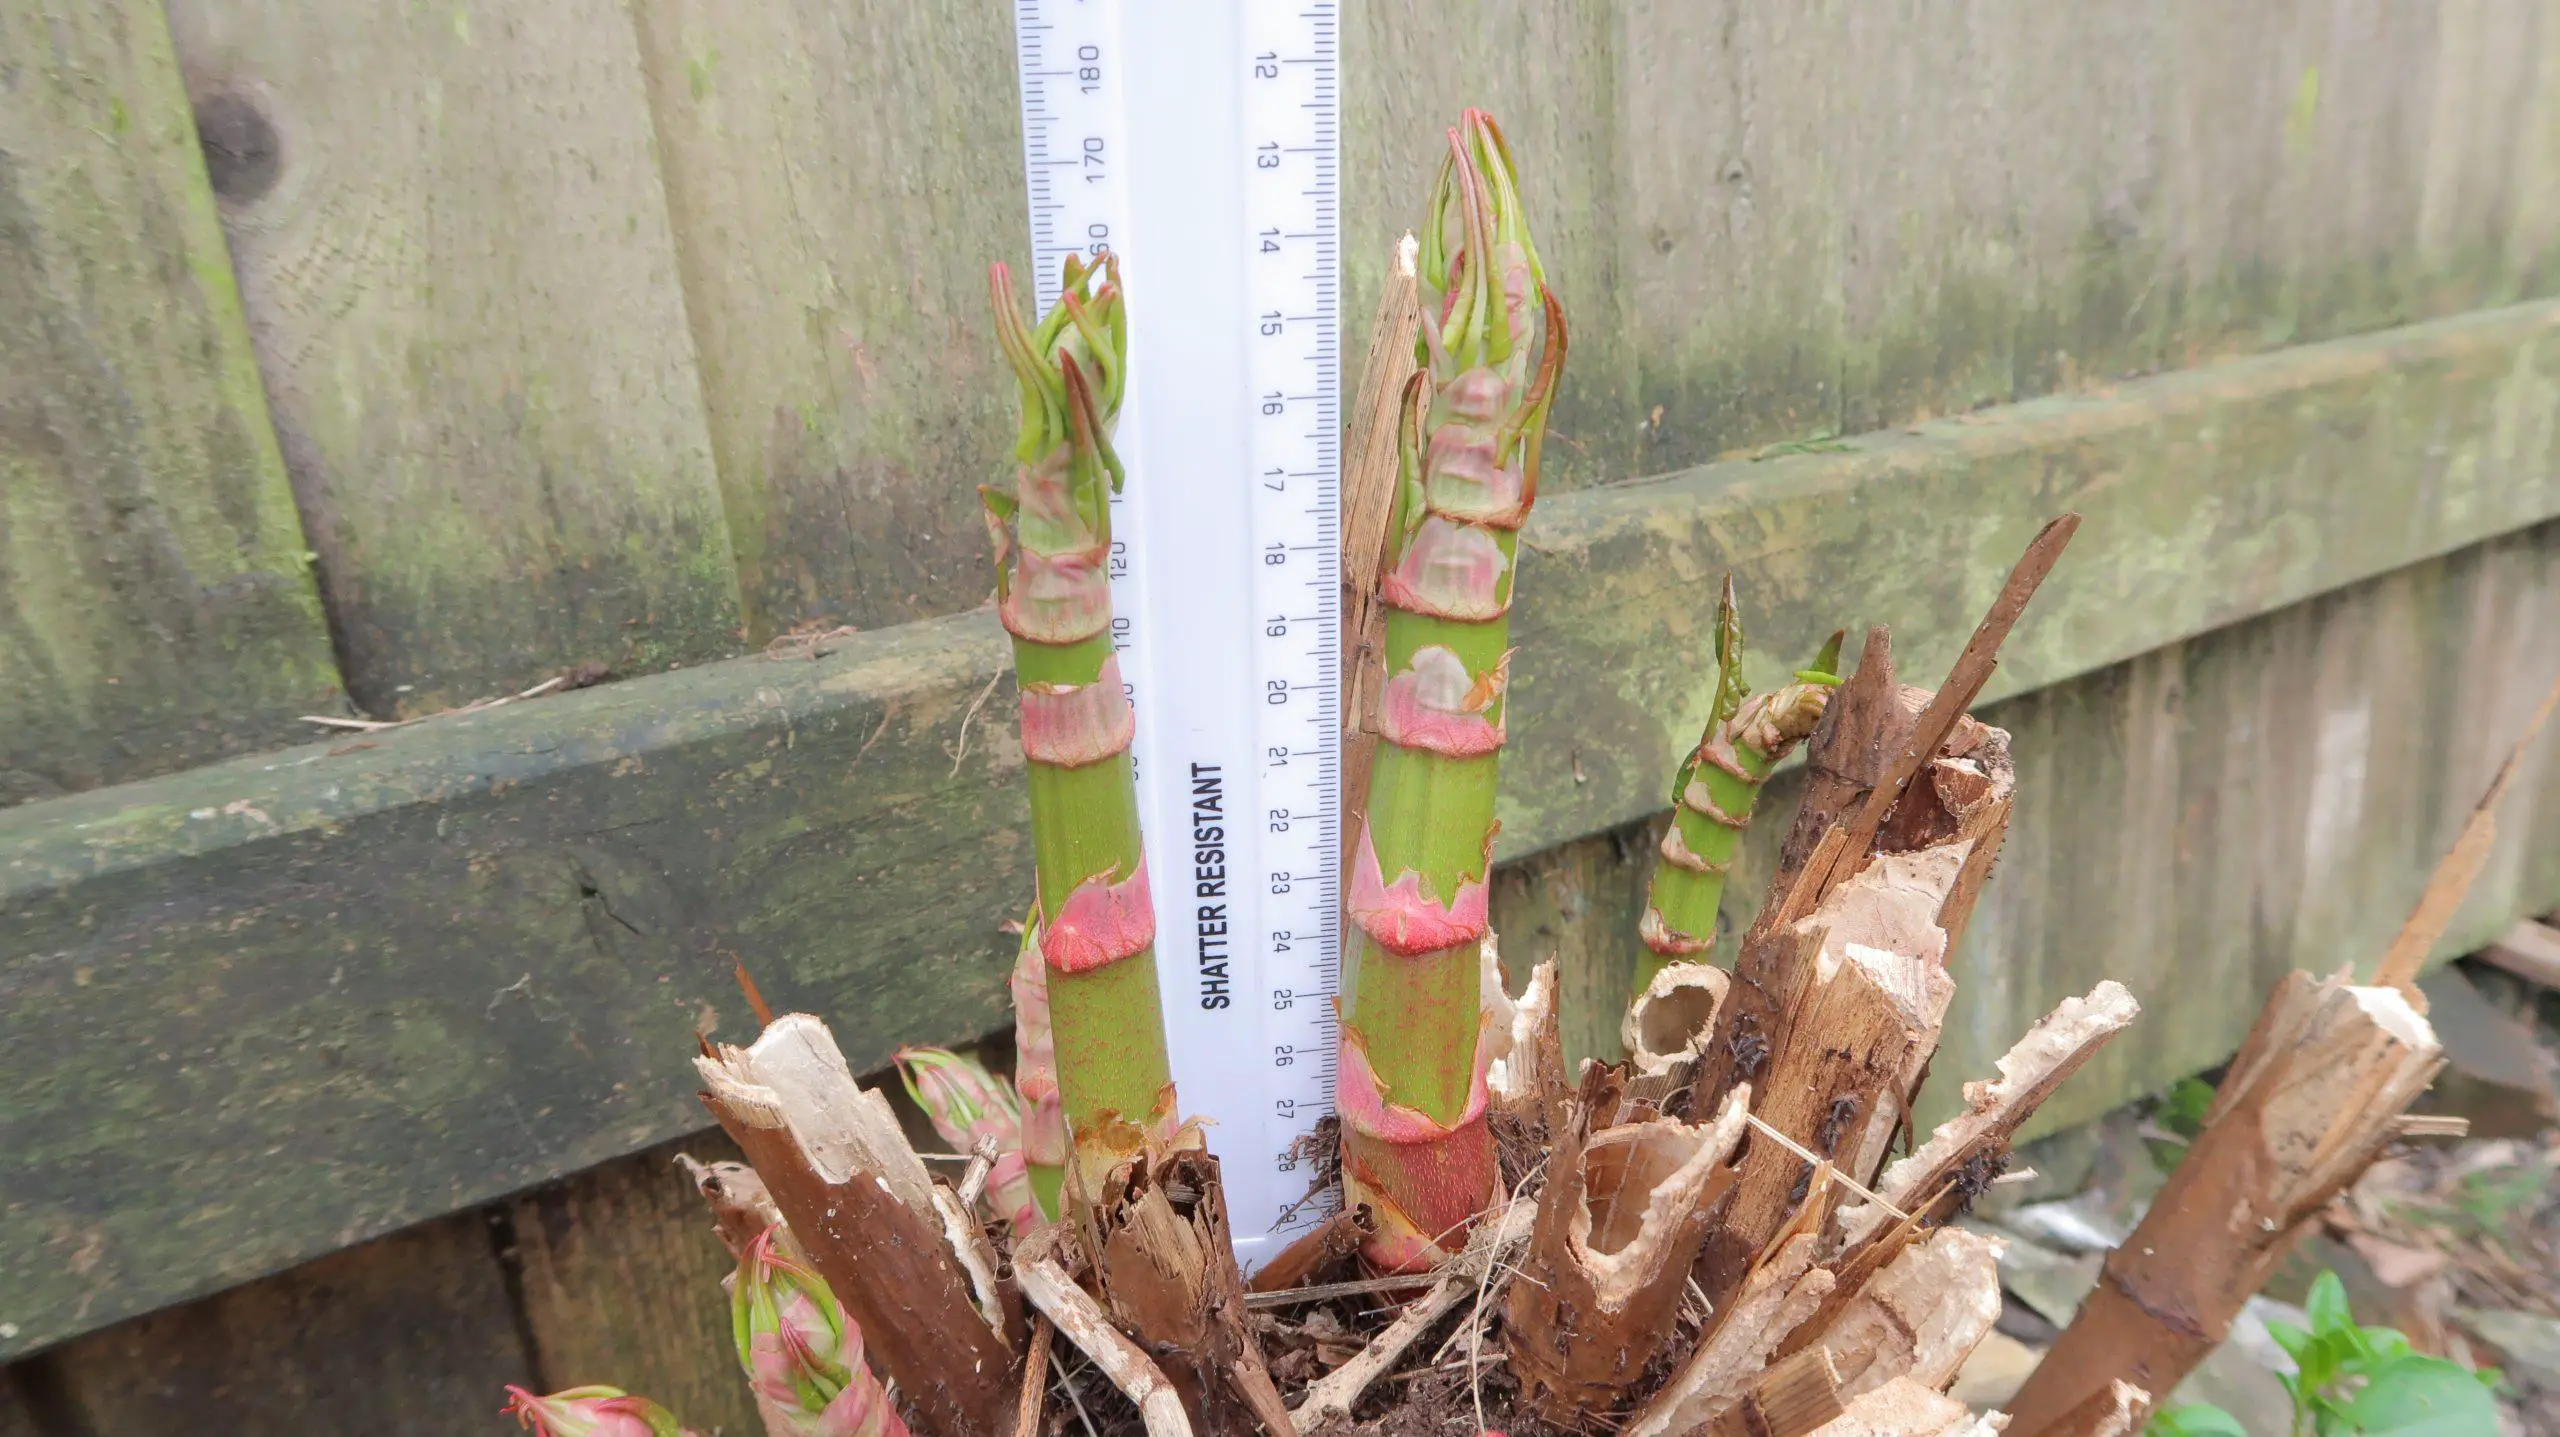 At two weeks the Japanese knotweed shoots are already several inches high